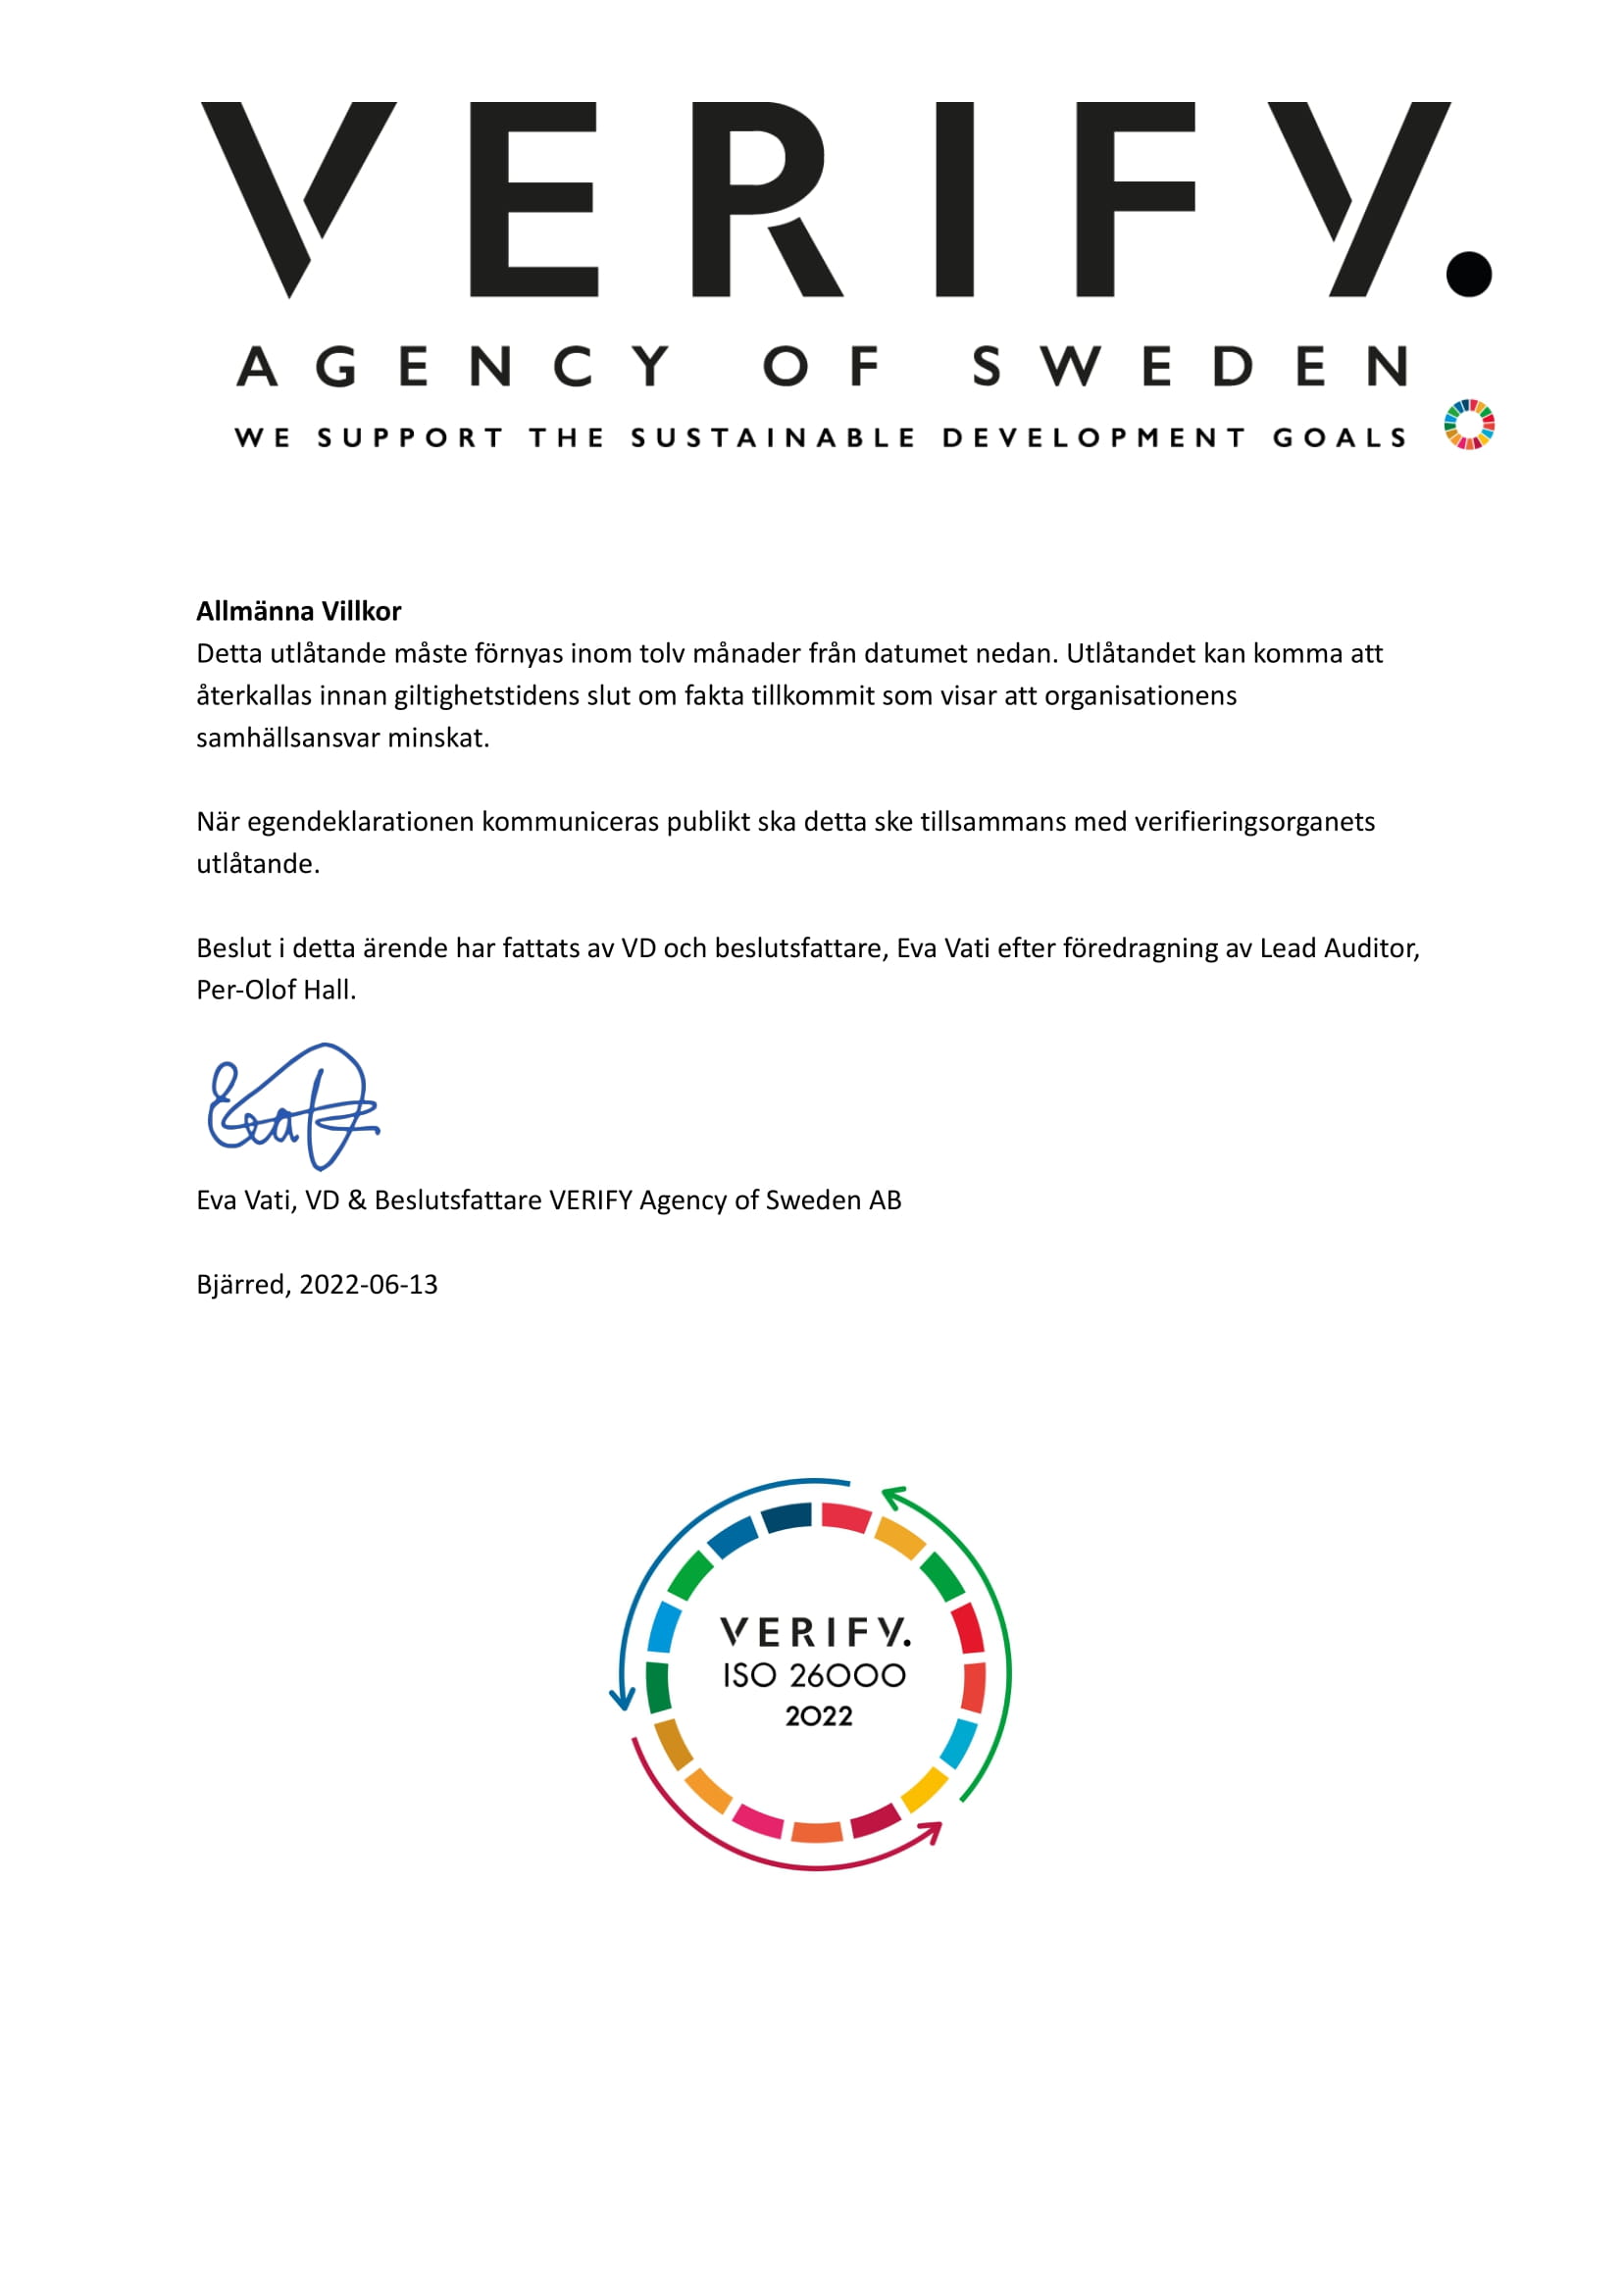 First Cargo Sweden AB has received its own declaration SIS / TS 2: 2021 to SS-EN ISO 26000: 2021,